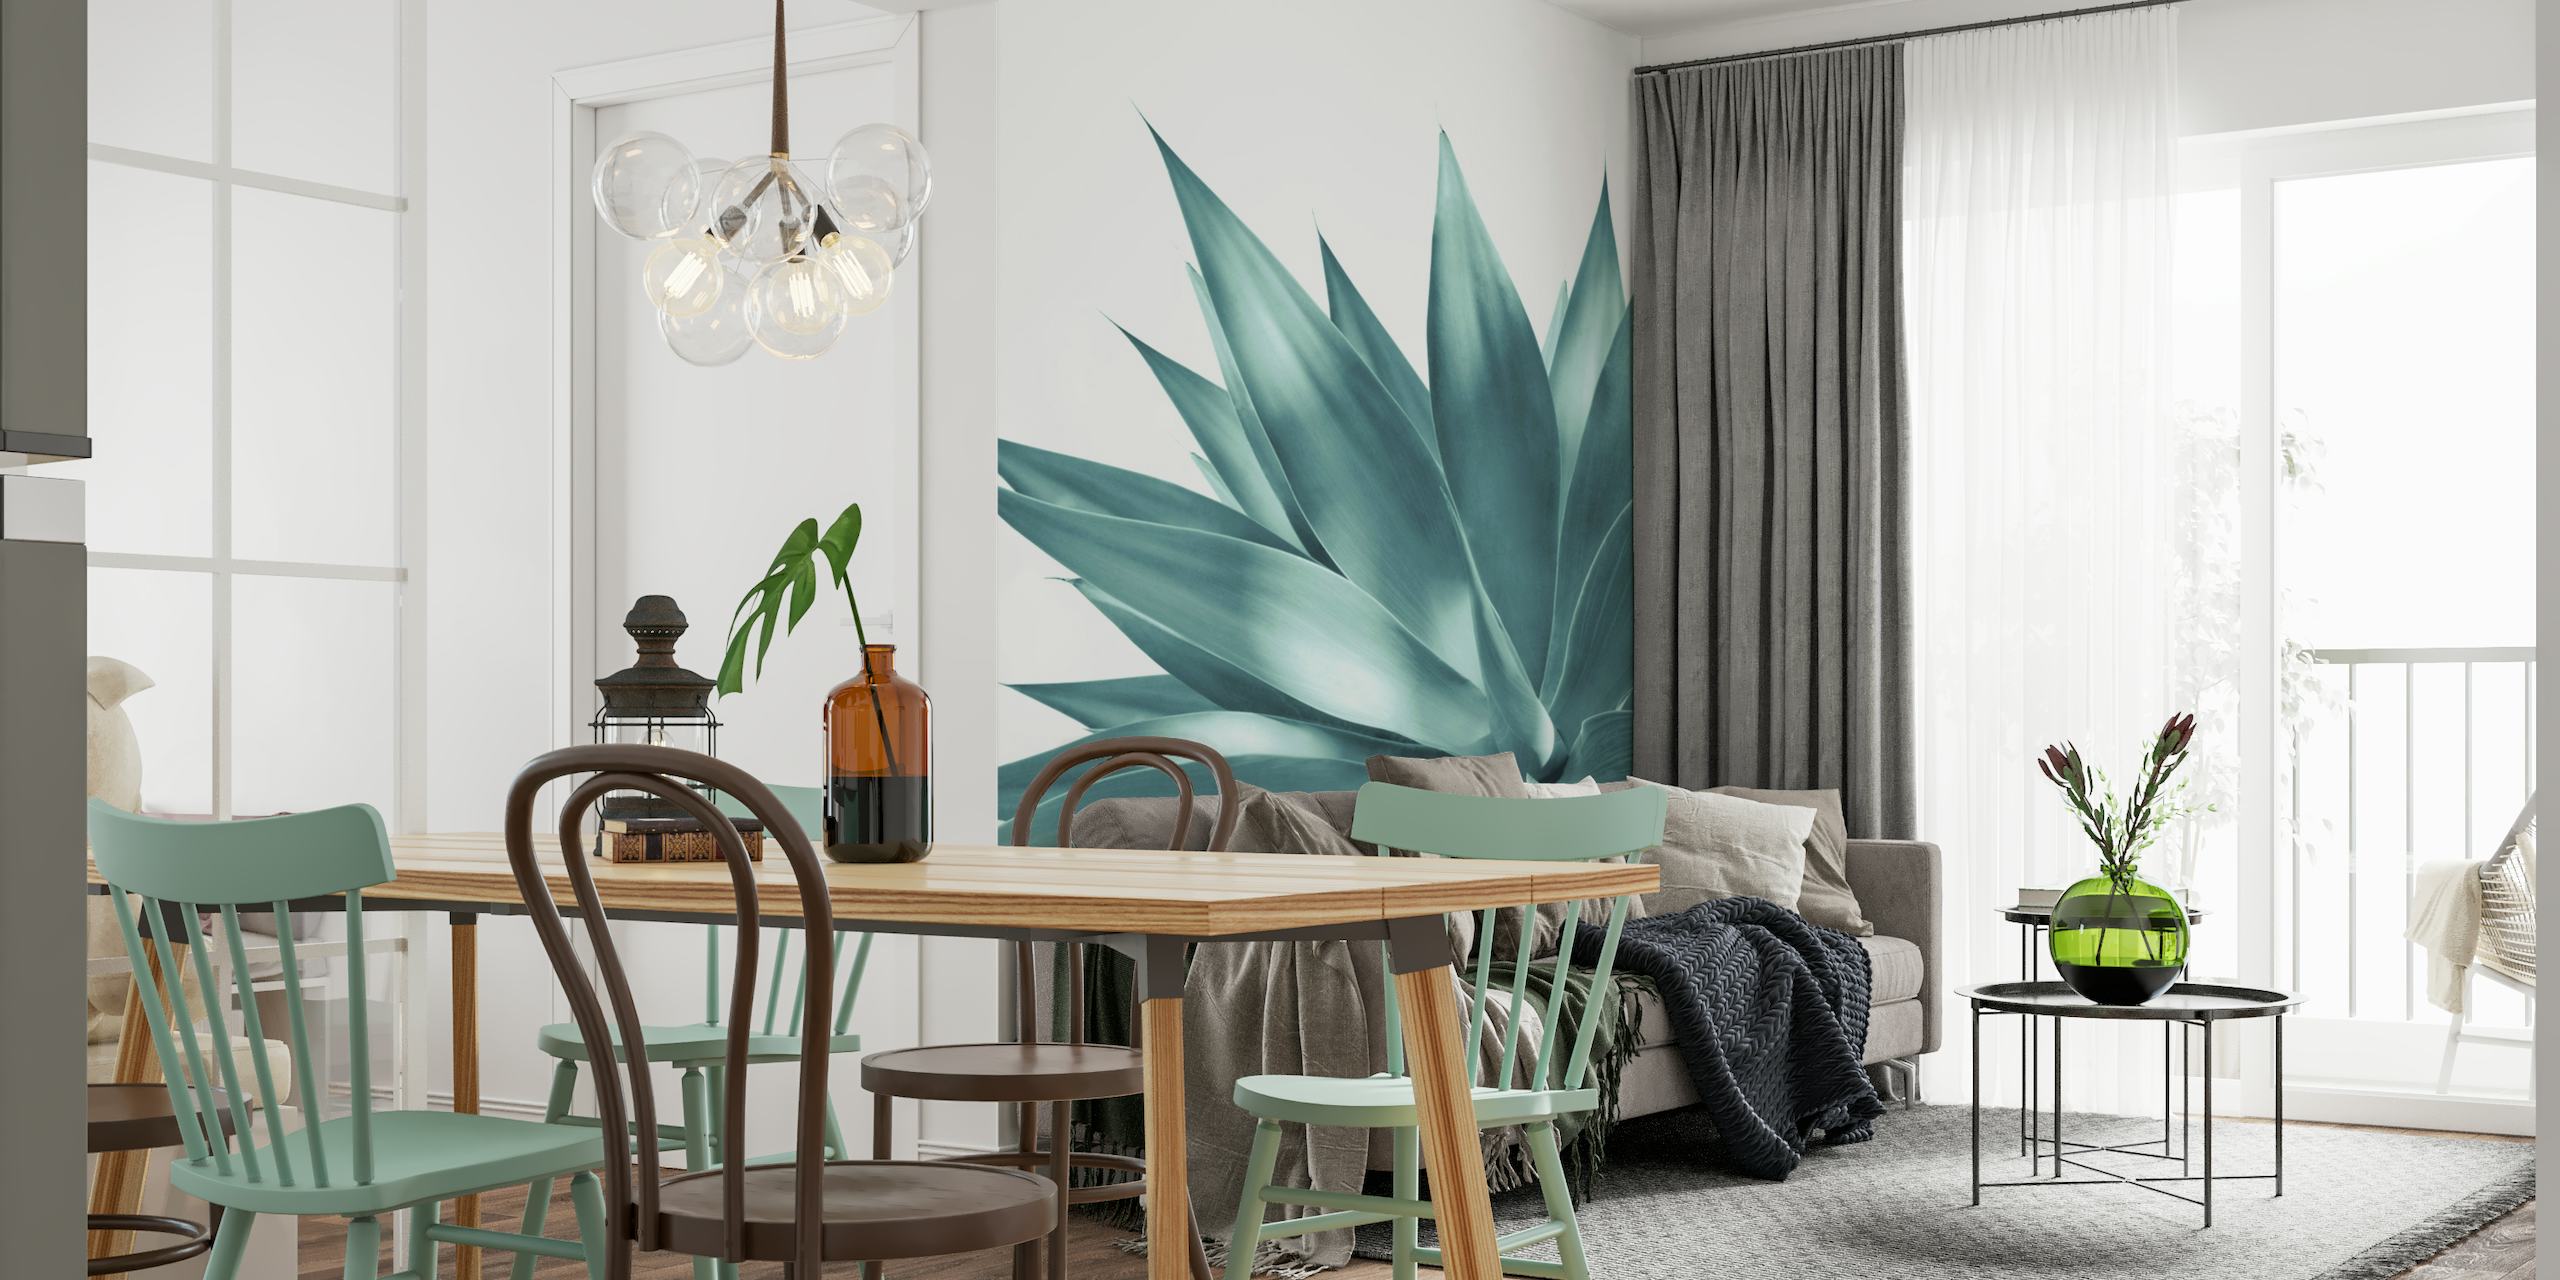 Elegantly detailed agave leaves wall mural in monochrome blue tones